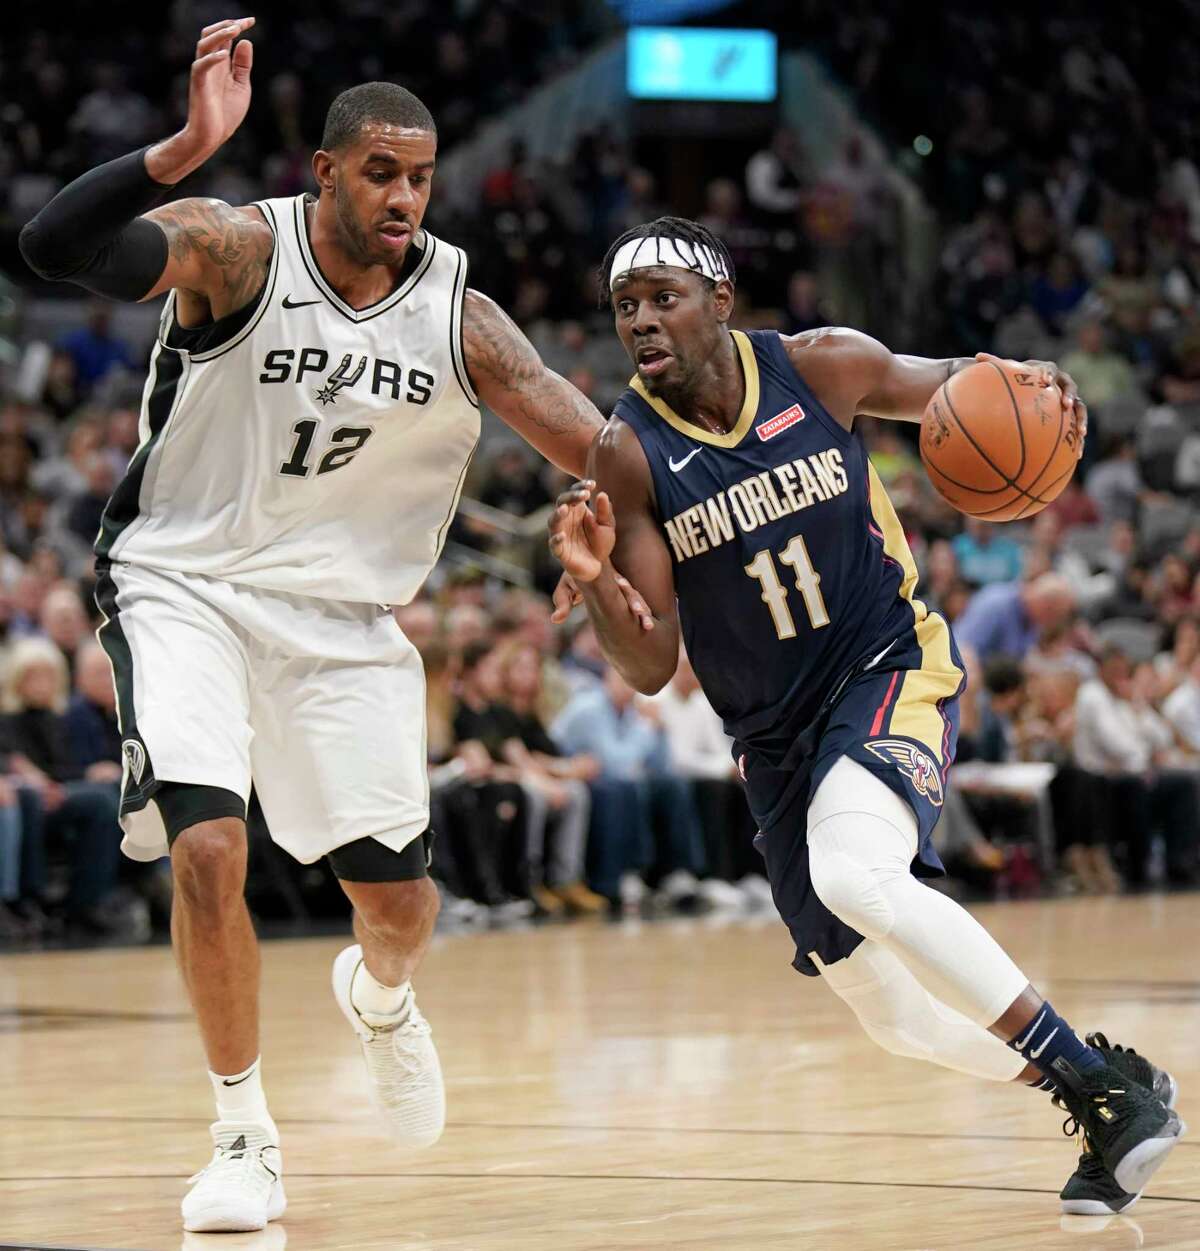 New Orleans Pelicans' Jrue Holiday (11) drives past San Antonio Spurs' LaMarcus Aldridge during the first half of an NBA basketball game, Thursday, March 15, 2018, in San Antonio. (AP Photo/Darren Abate)